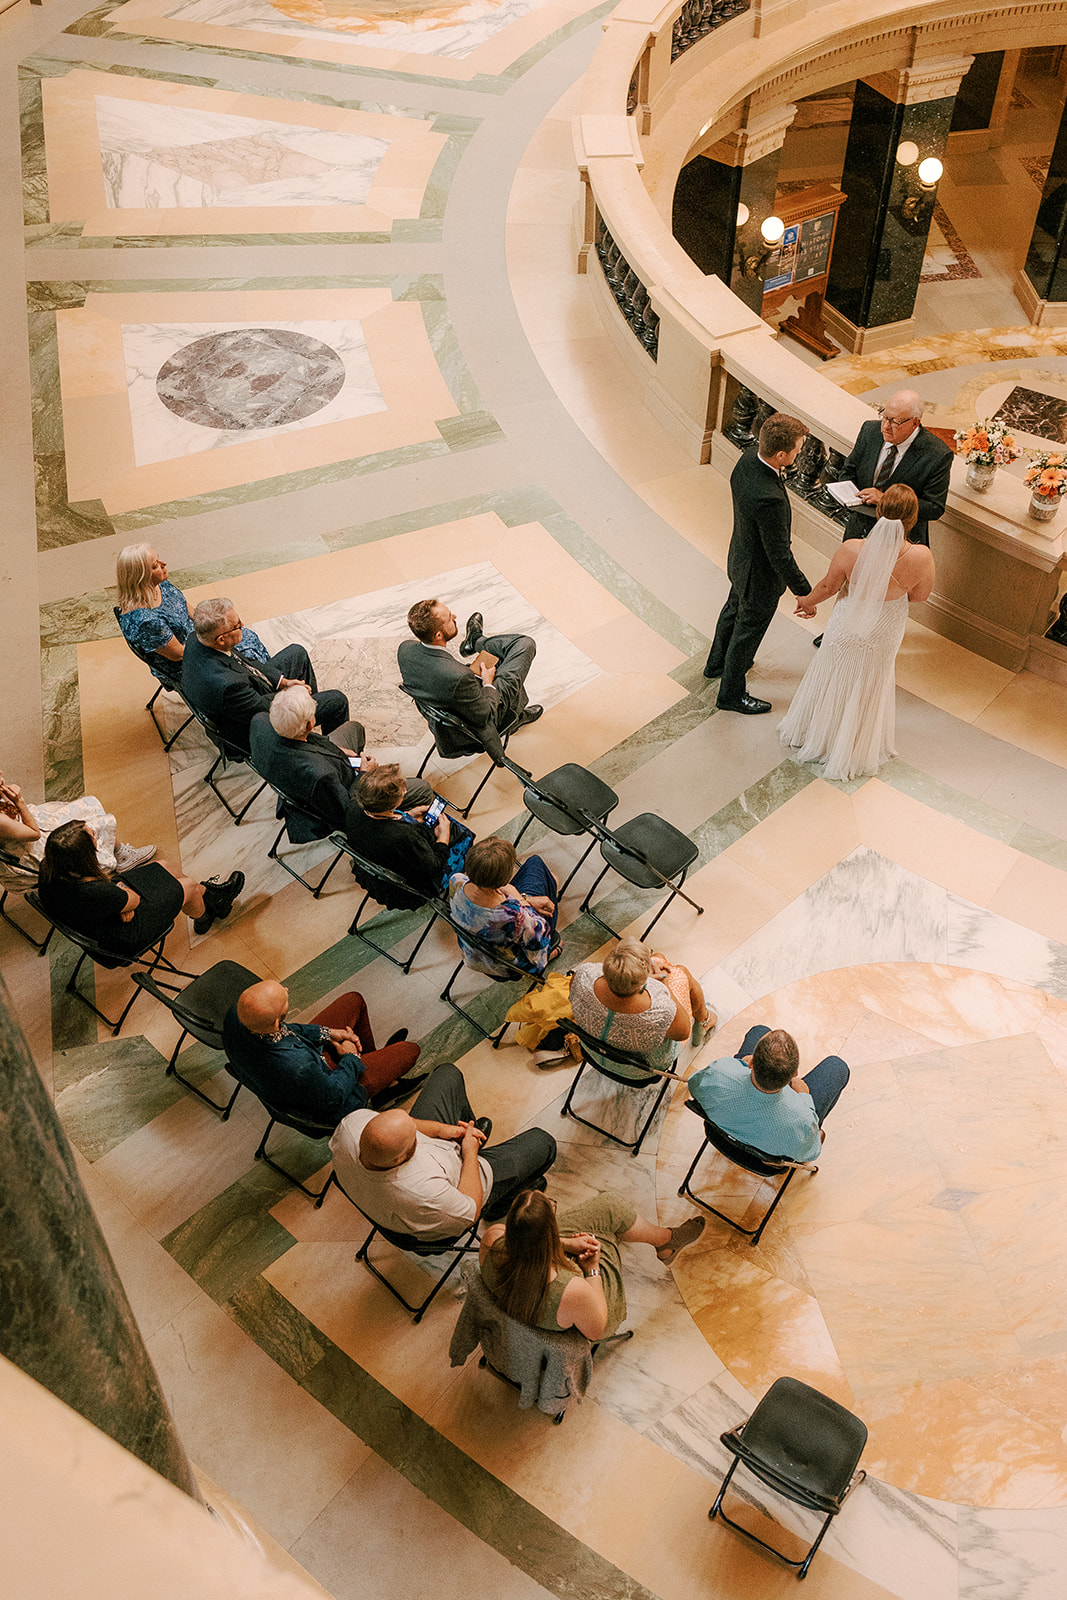 bride and groom have intimate ceremony on their elopement day at the wisconsin state capitol